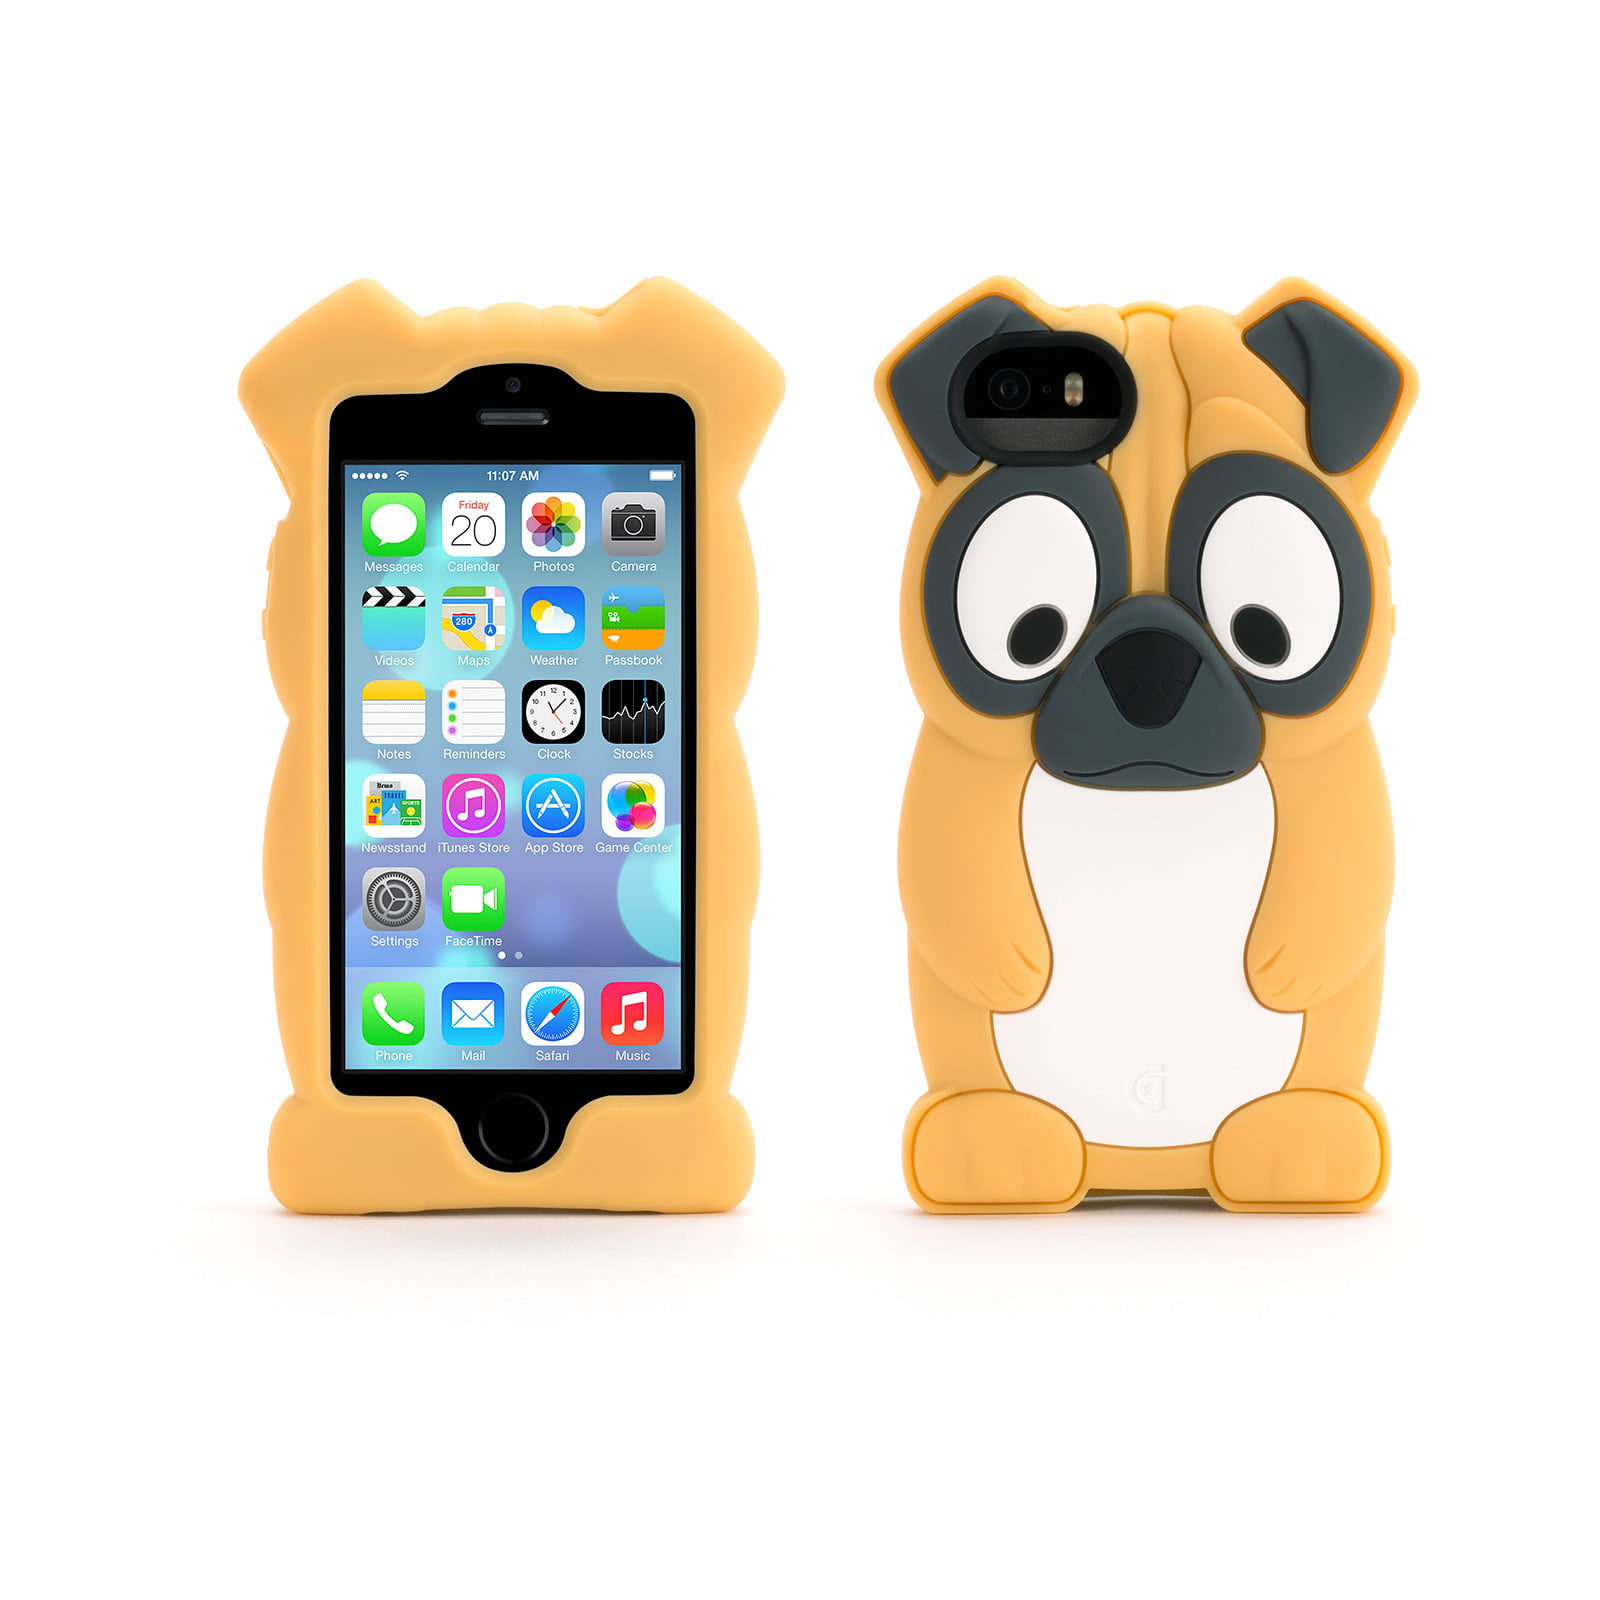 iPhone 5 Case,iPhone SE Case iPhone 5S Case Tznzxm New 3D Cartoon Animals Character Shockproof Full Protective Soft Silicone Rubber Anti-Scratch Non-Slip Phone Back Case for iPhone 5S 5 SE Panda